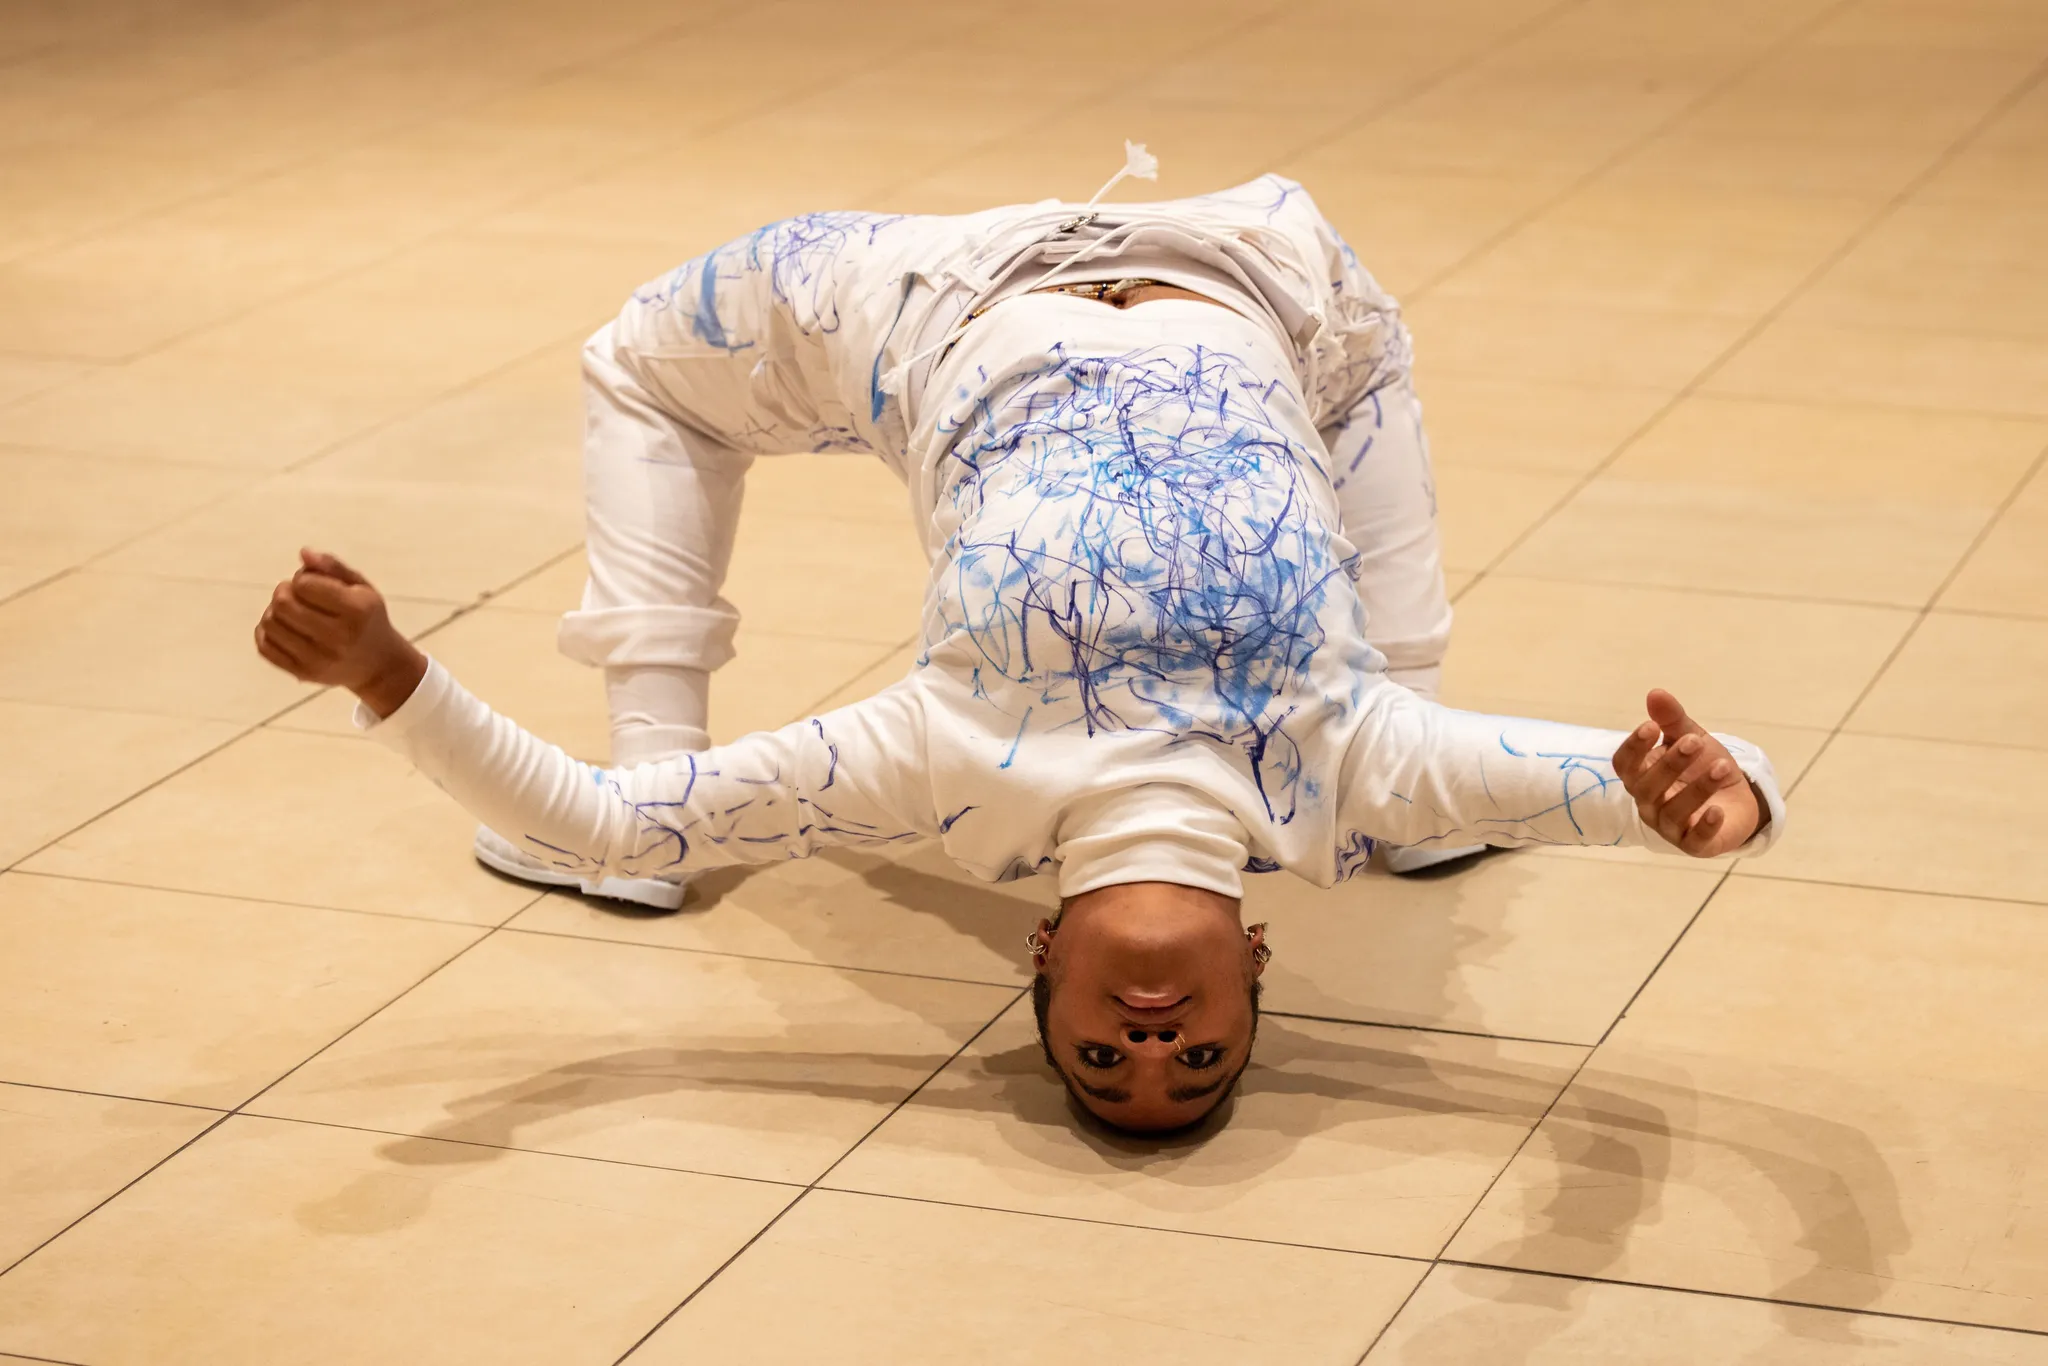 Performer stretching into a bridge pose on the floor, gazing intensely at the camera.